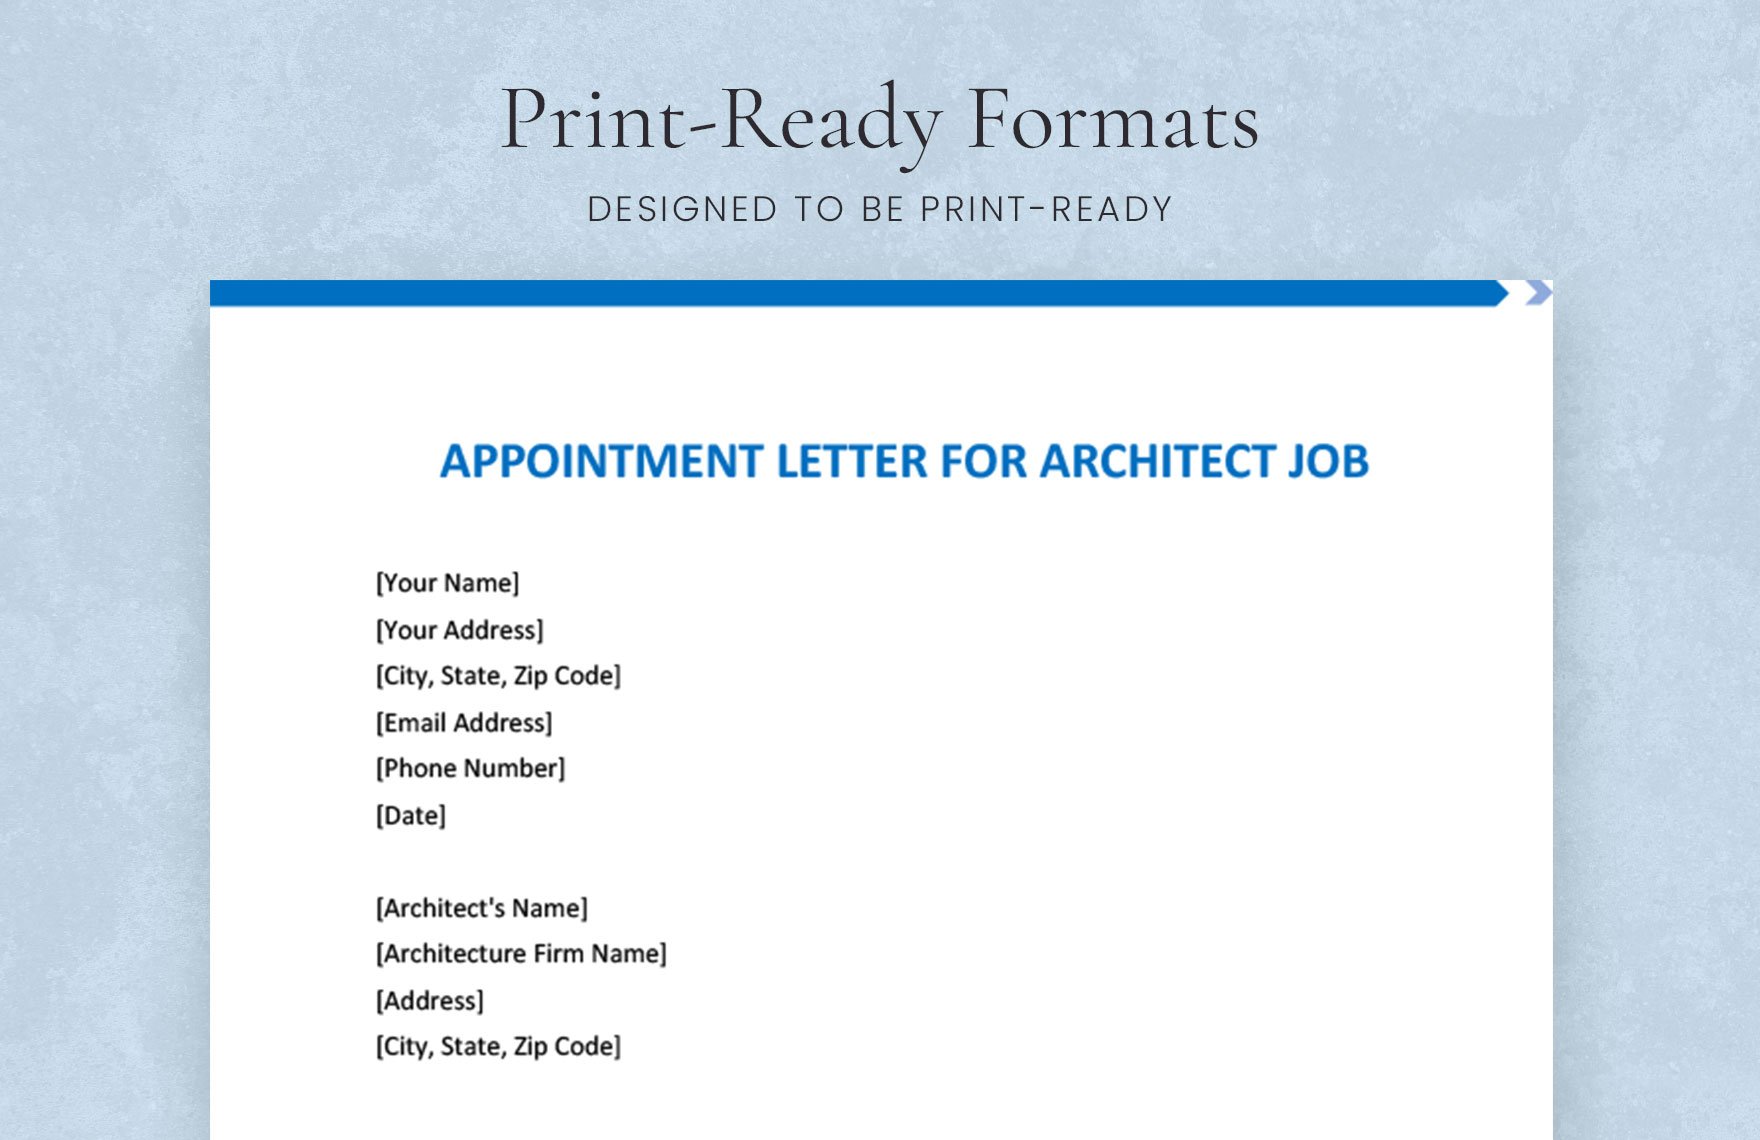 Appointment Letter for Architect Job